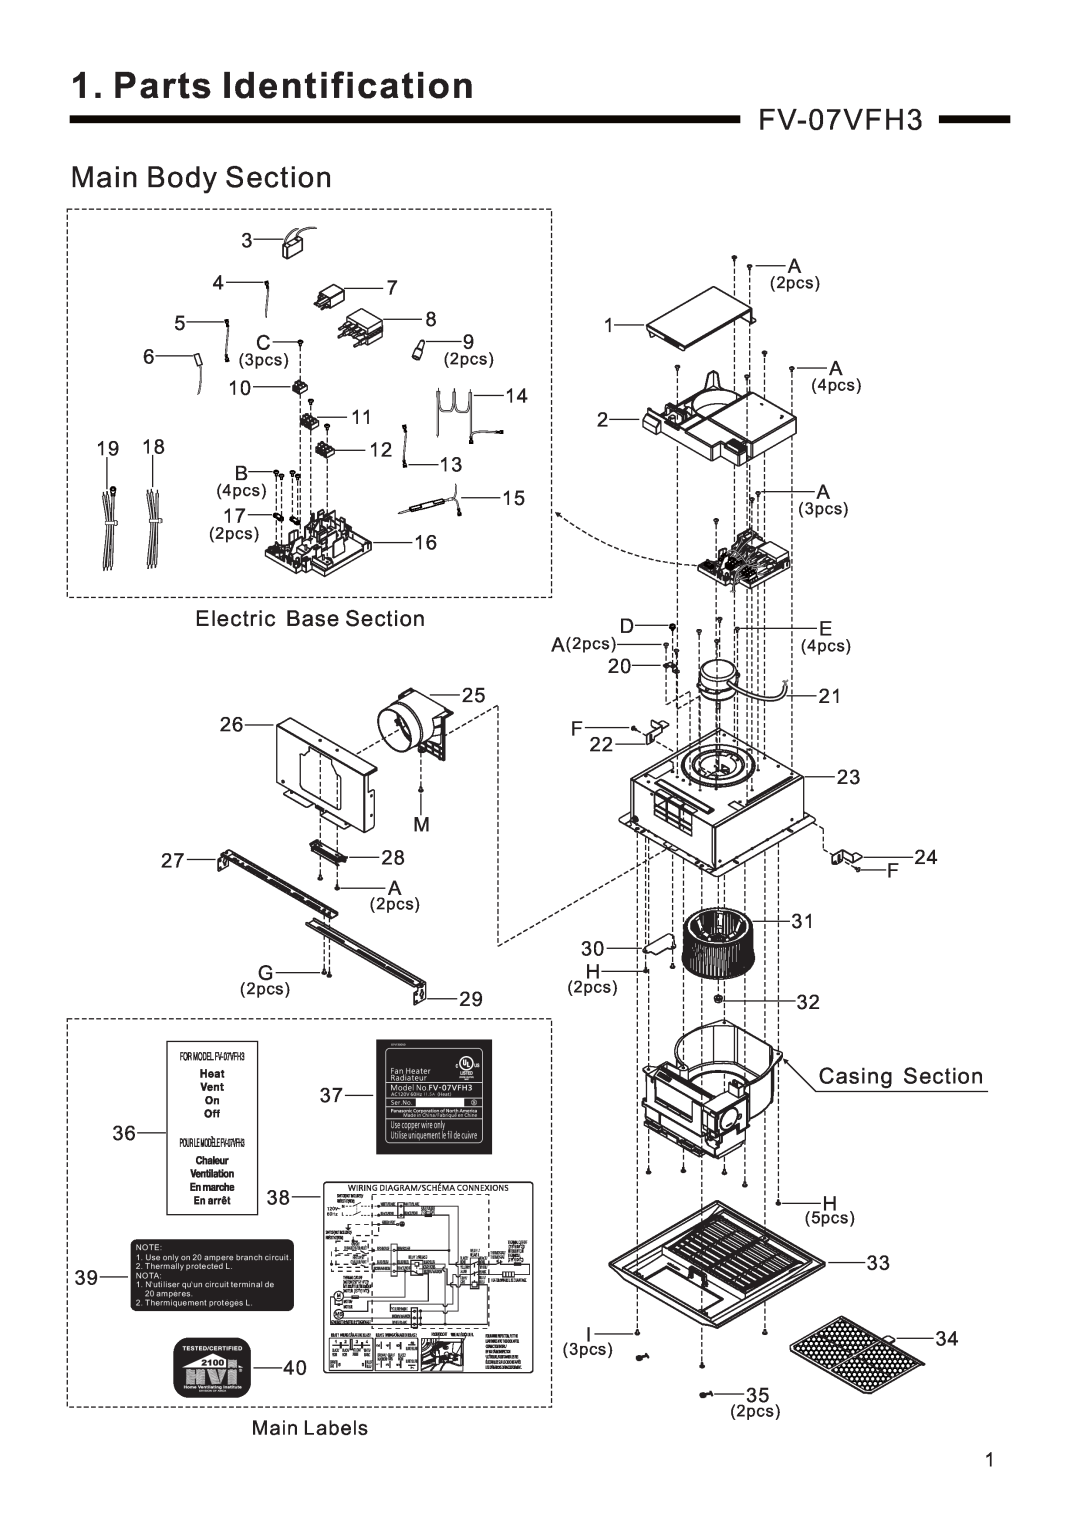 Panasonic FV-07VFH3 service manual Parts Identification, Main Body Section, Electric Base Section, Casing Section 